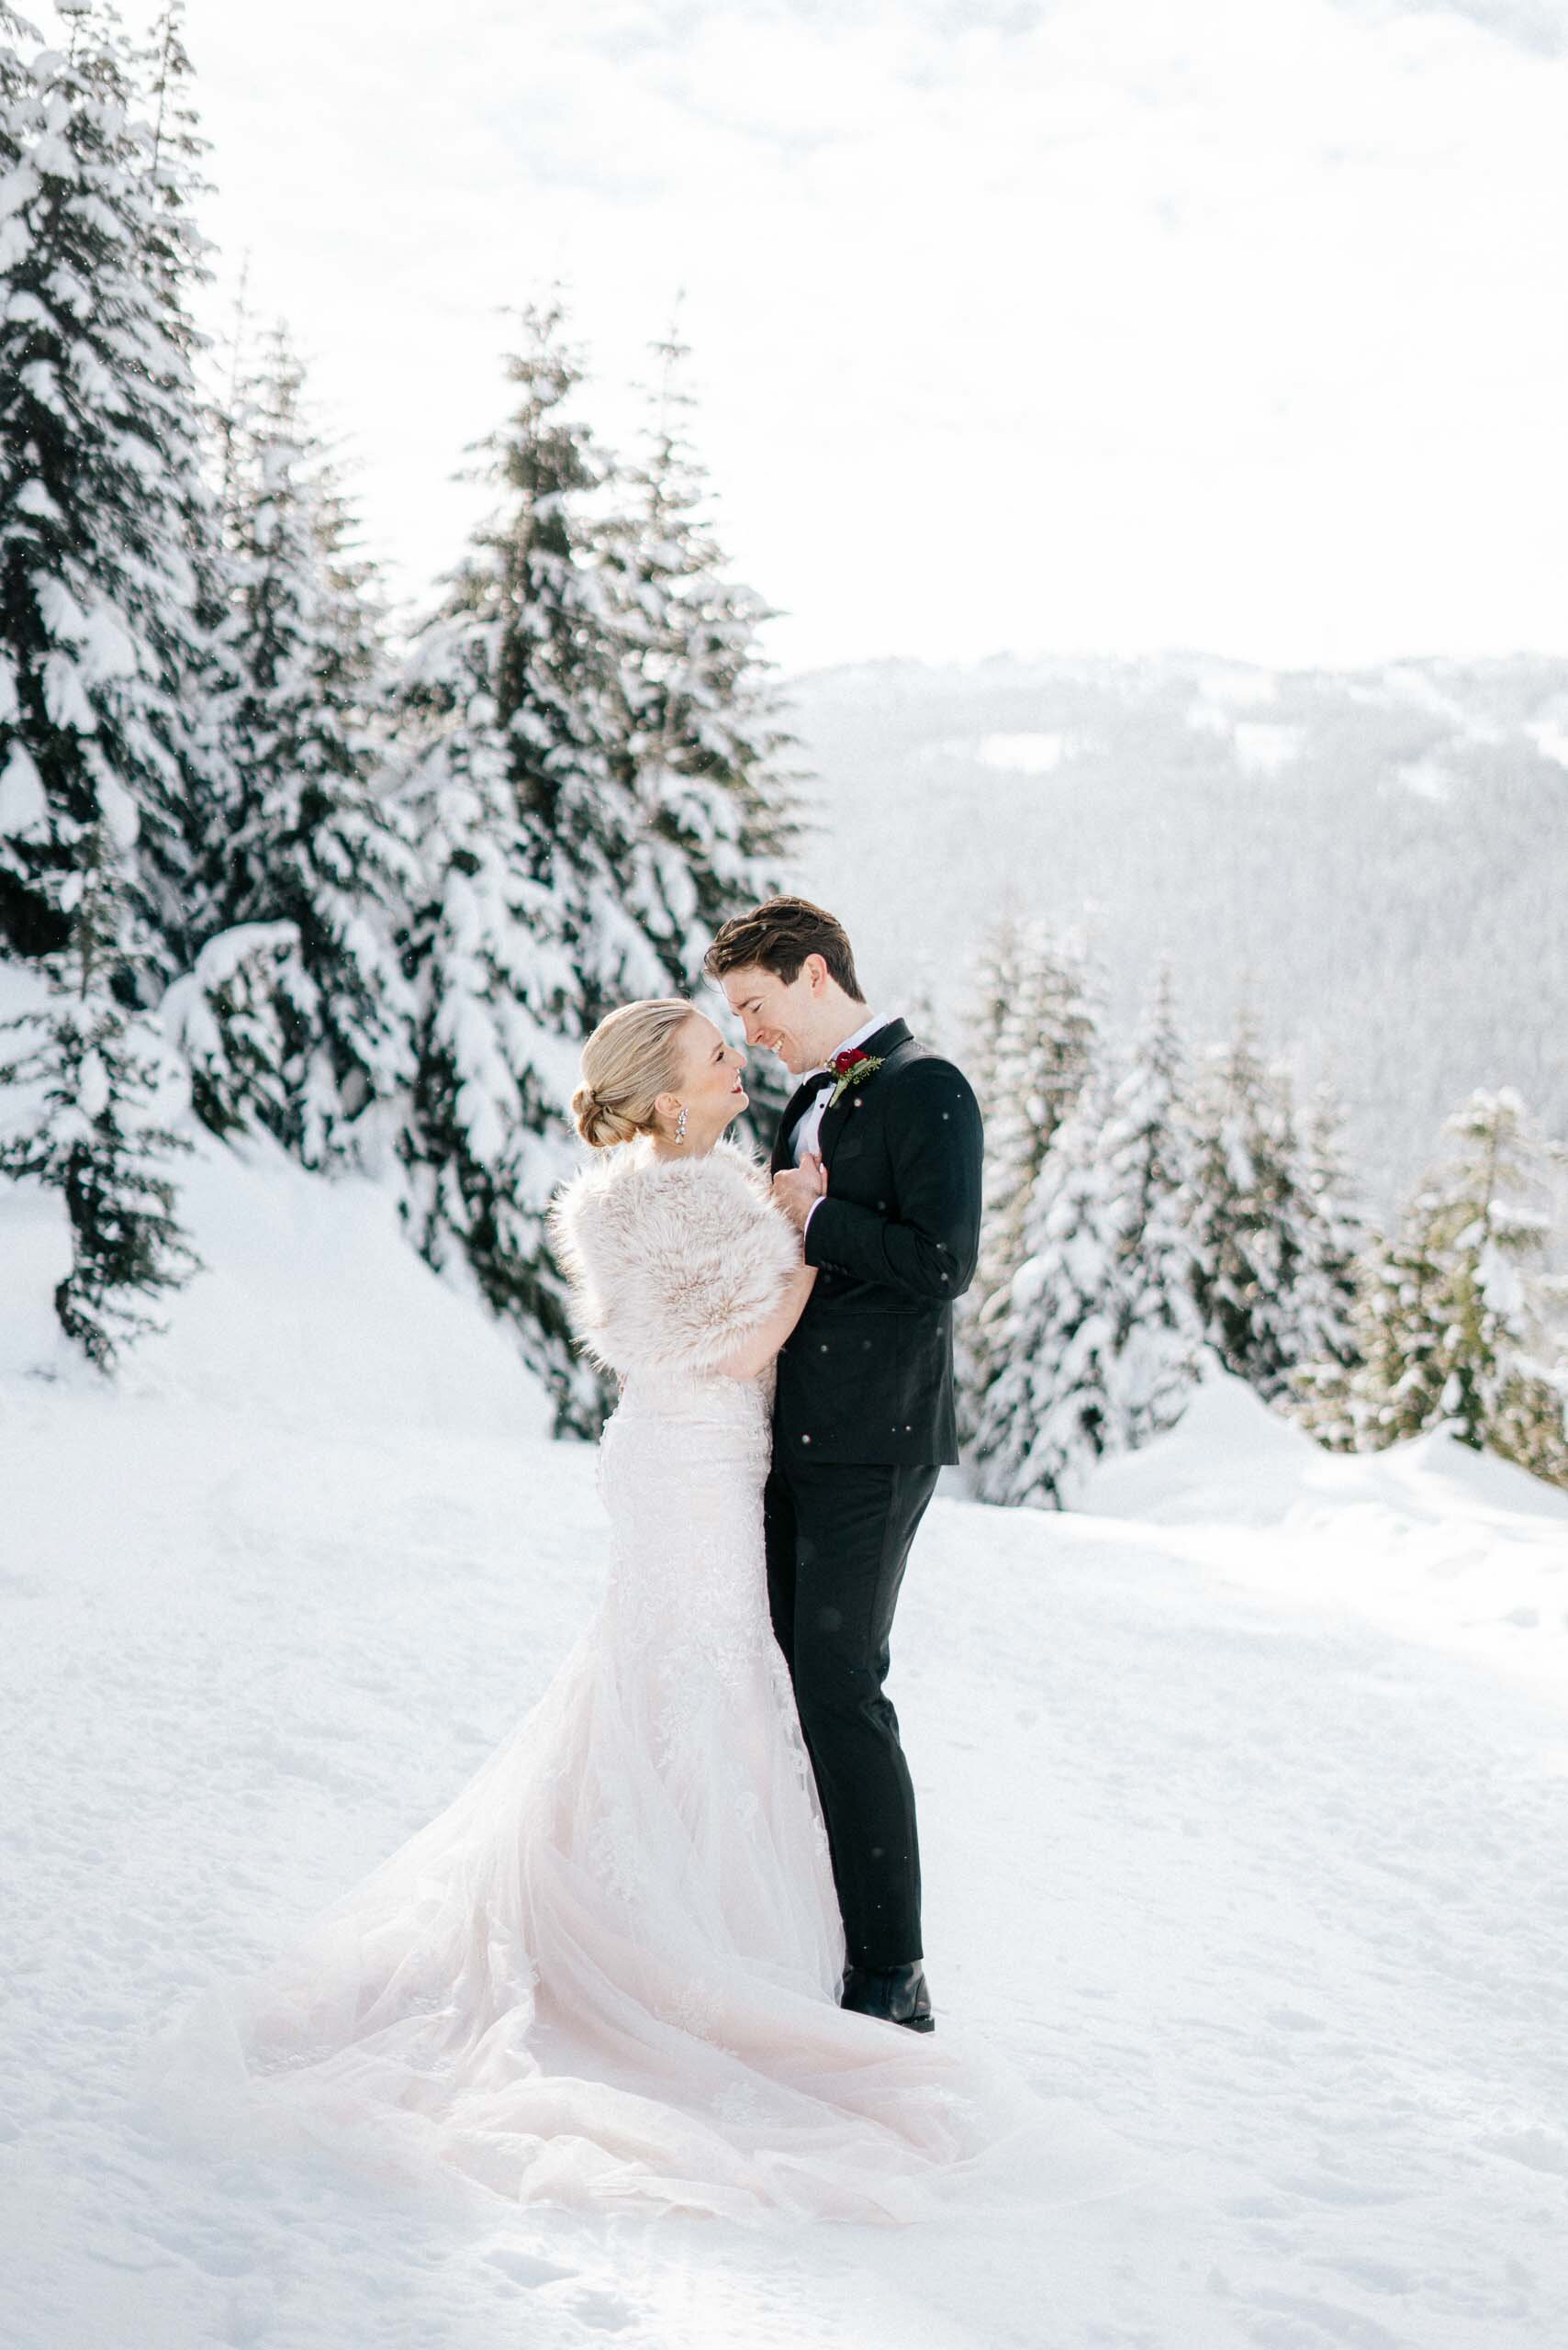 A bride in a fur stole holds her groom surrounded by snowy evergreens at their Whistler BC Weddin